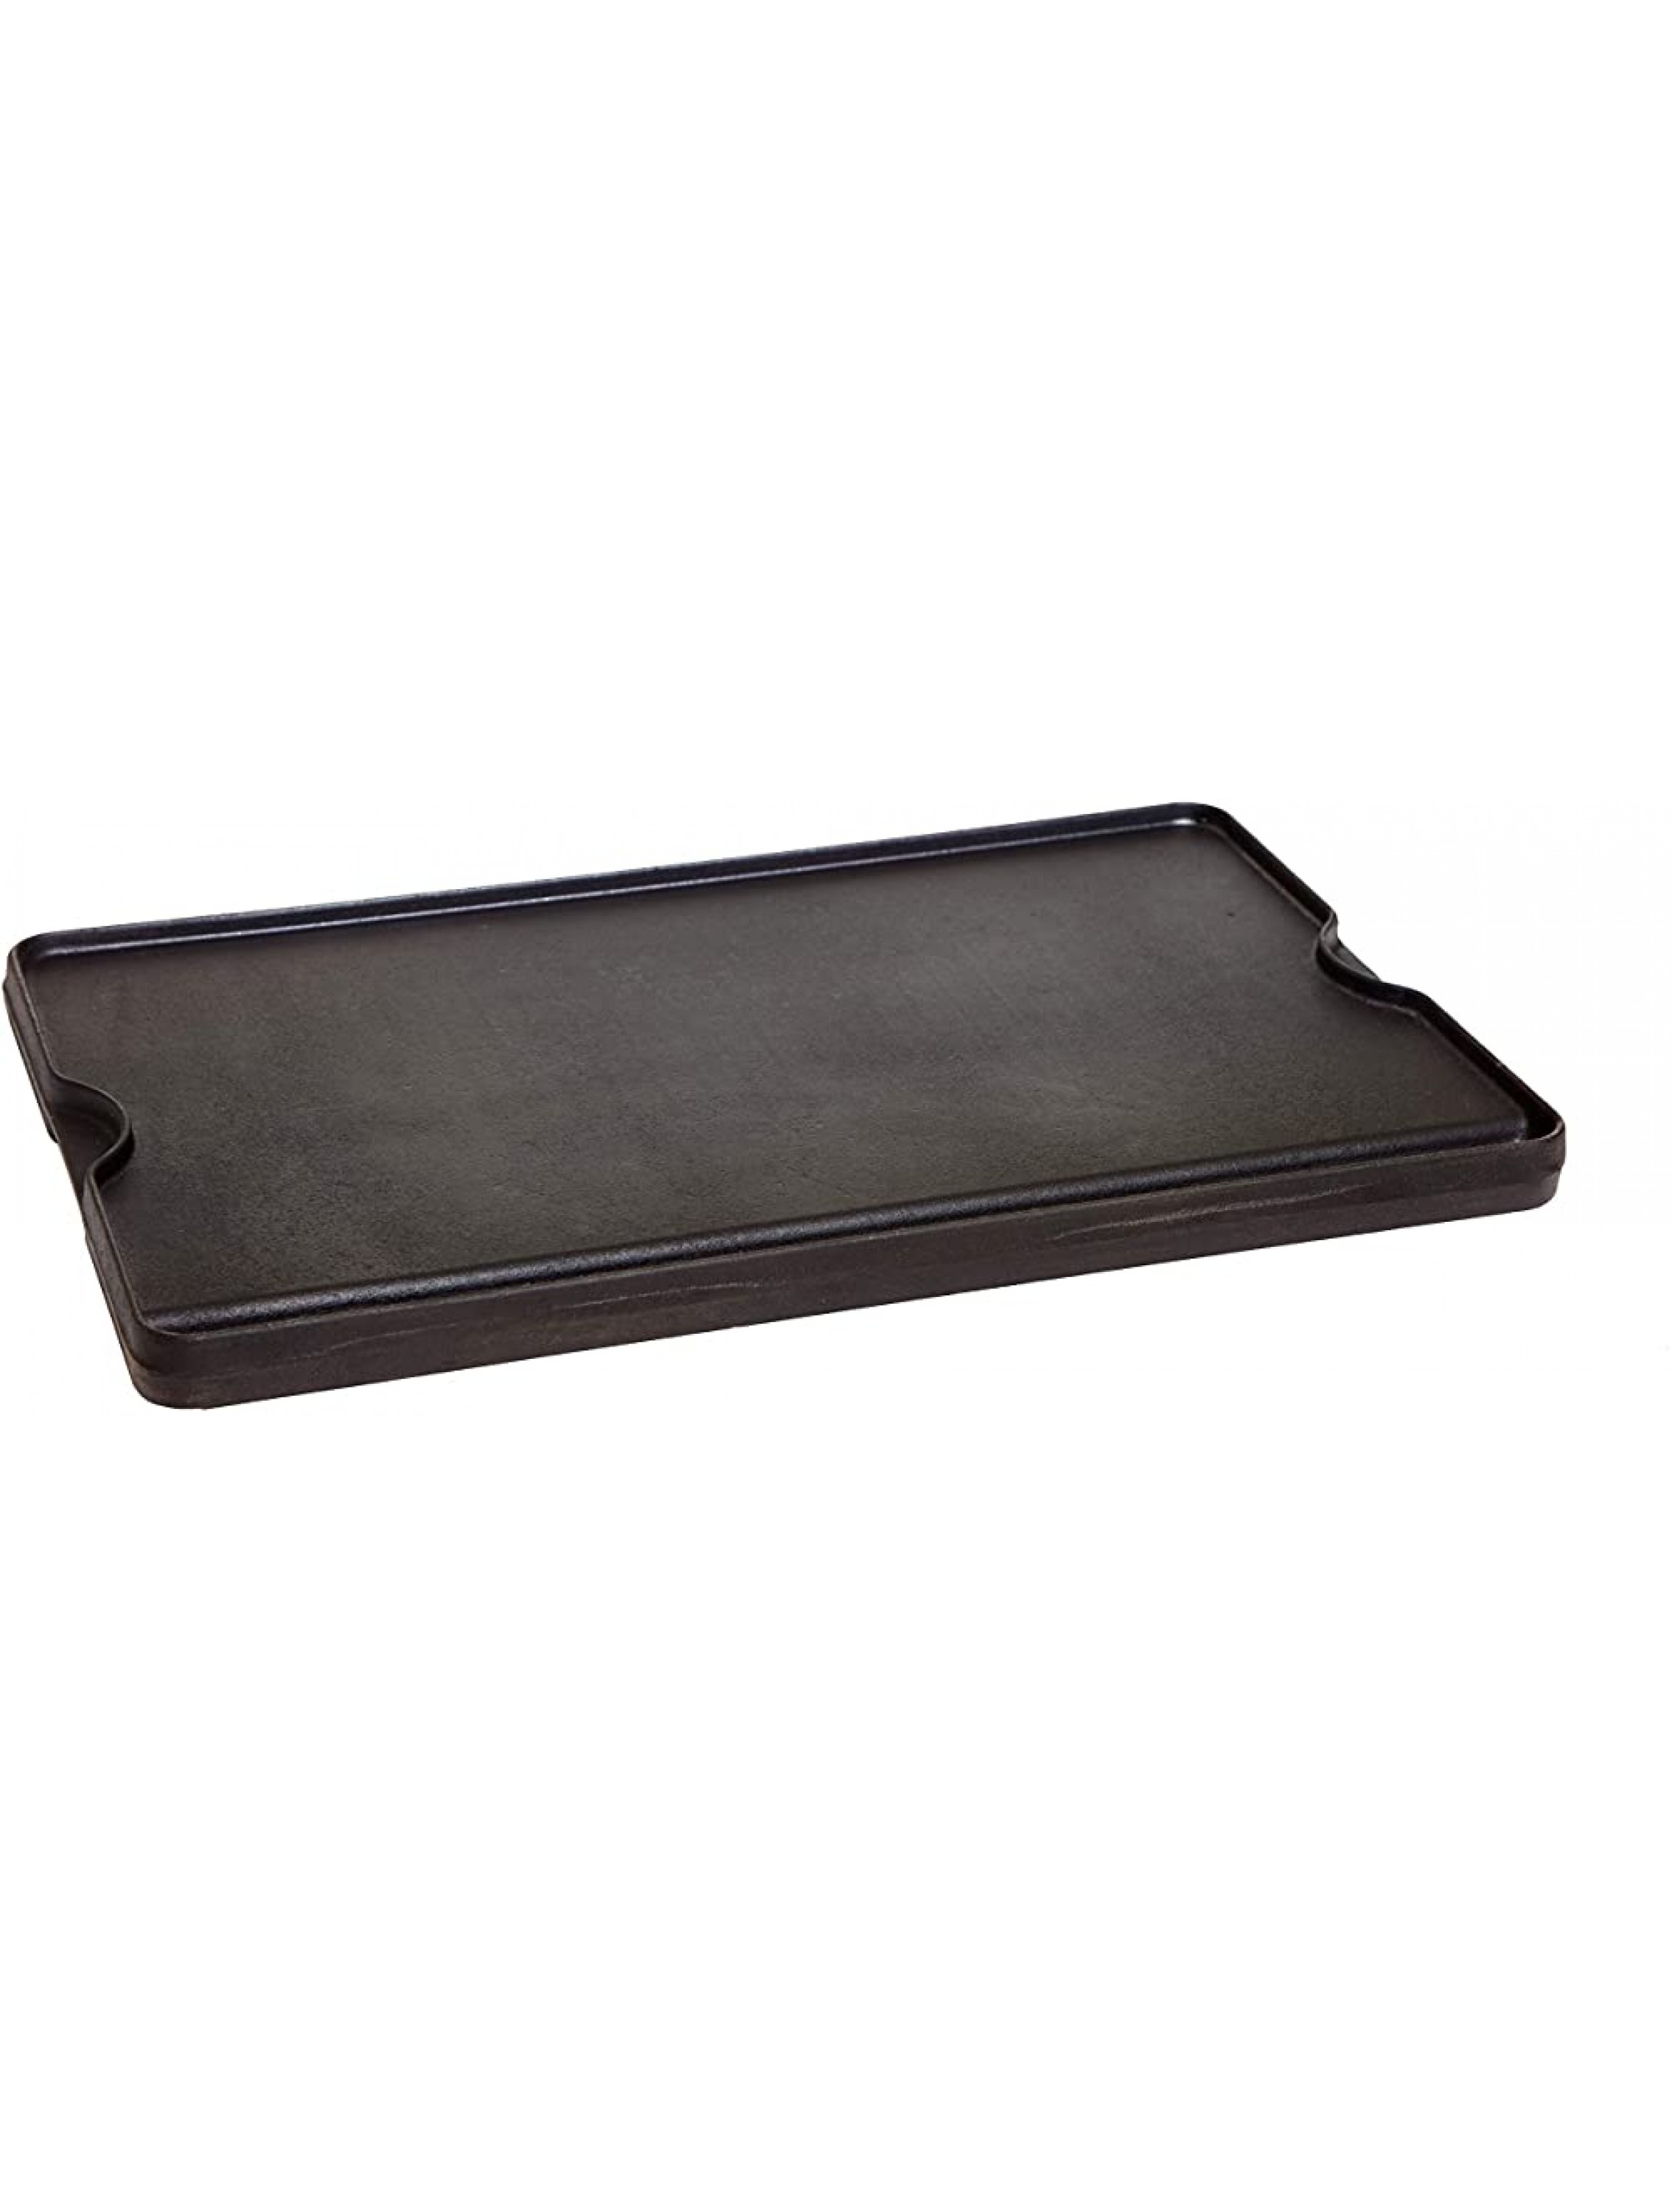 Camp Chef Reversible Pre-seasoned Cast Iron Griddle Cooking Surface 16 x 24 - BEGSXDB1A